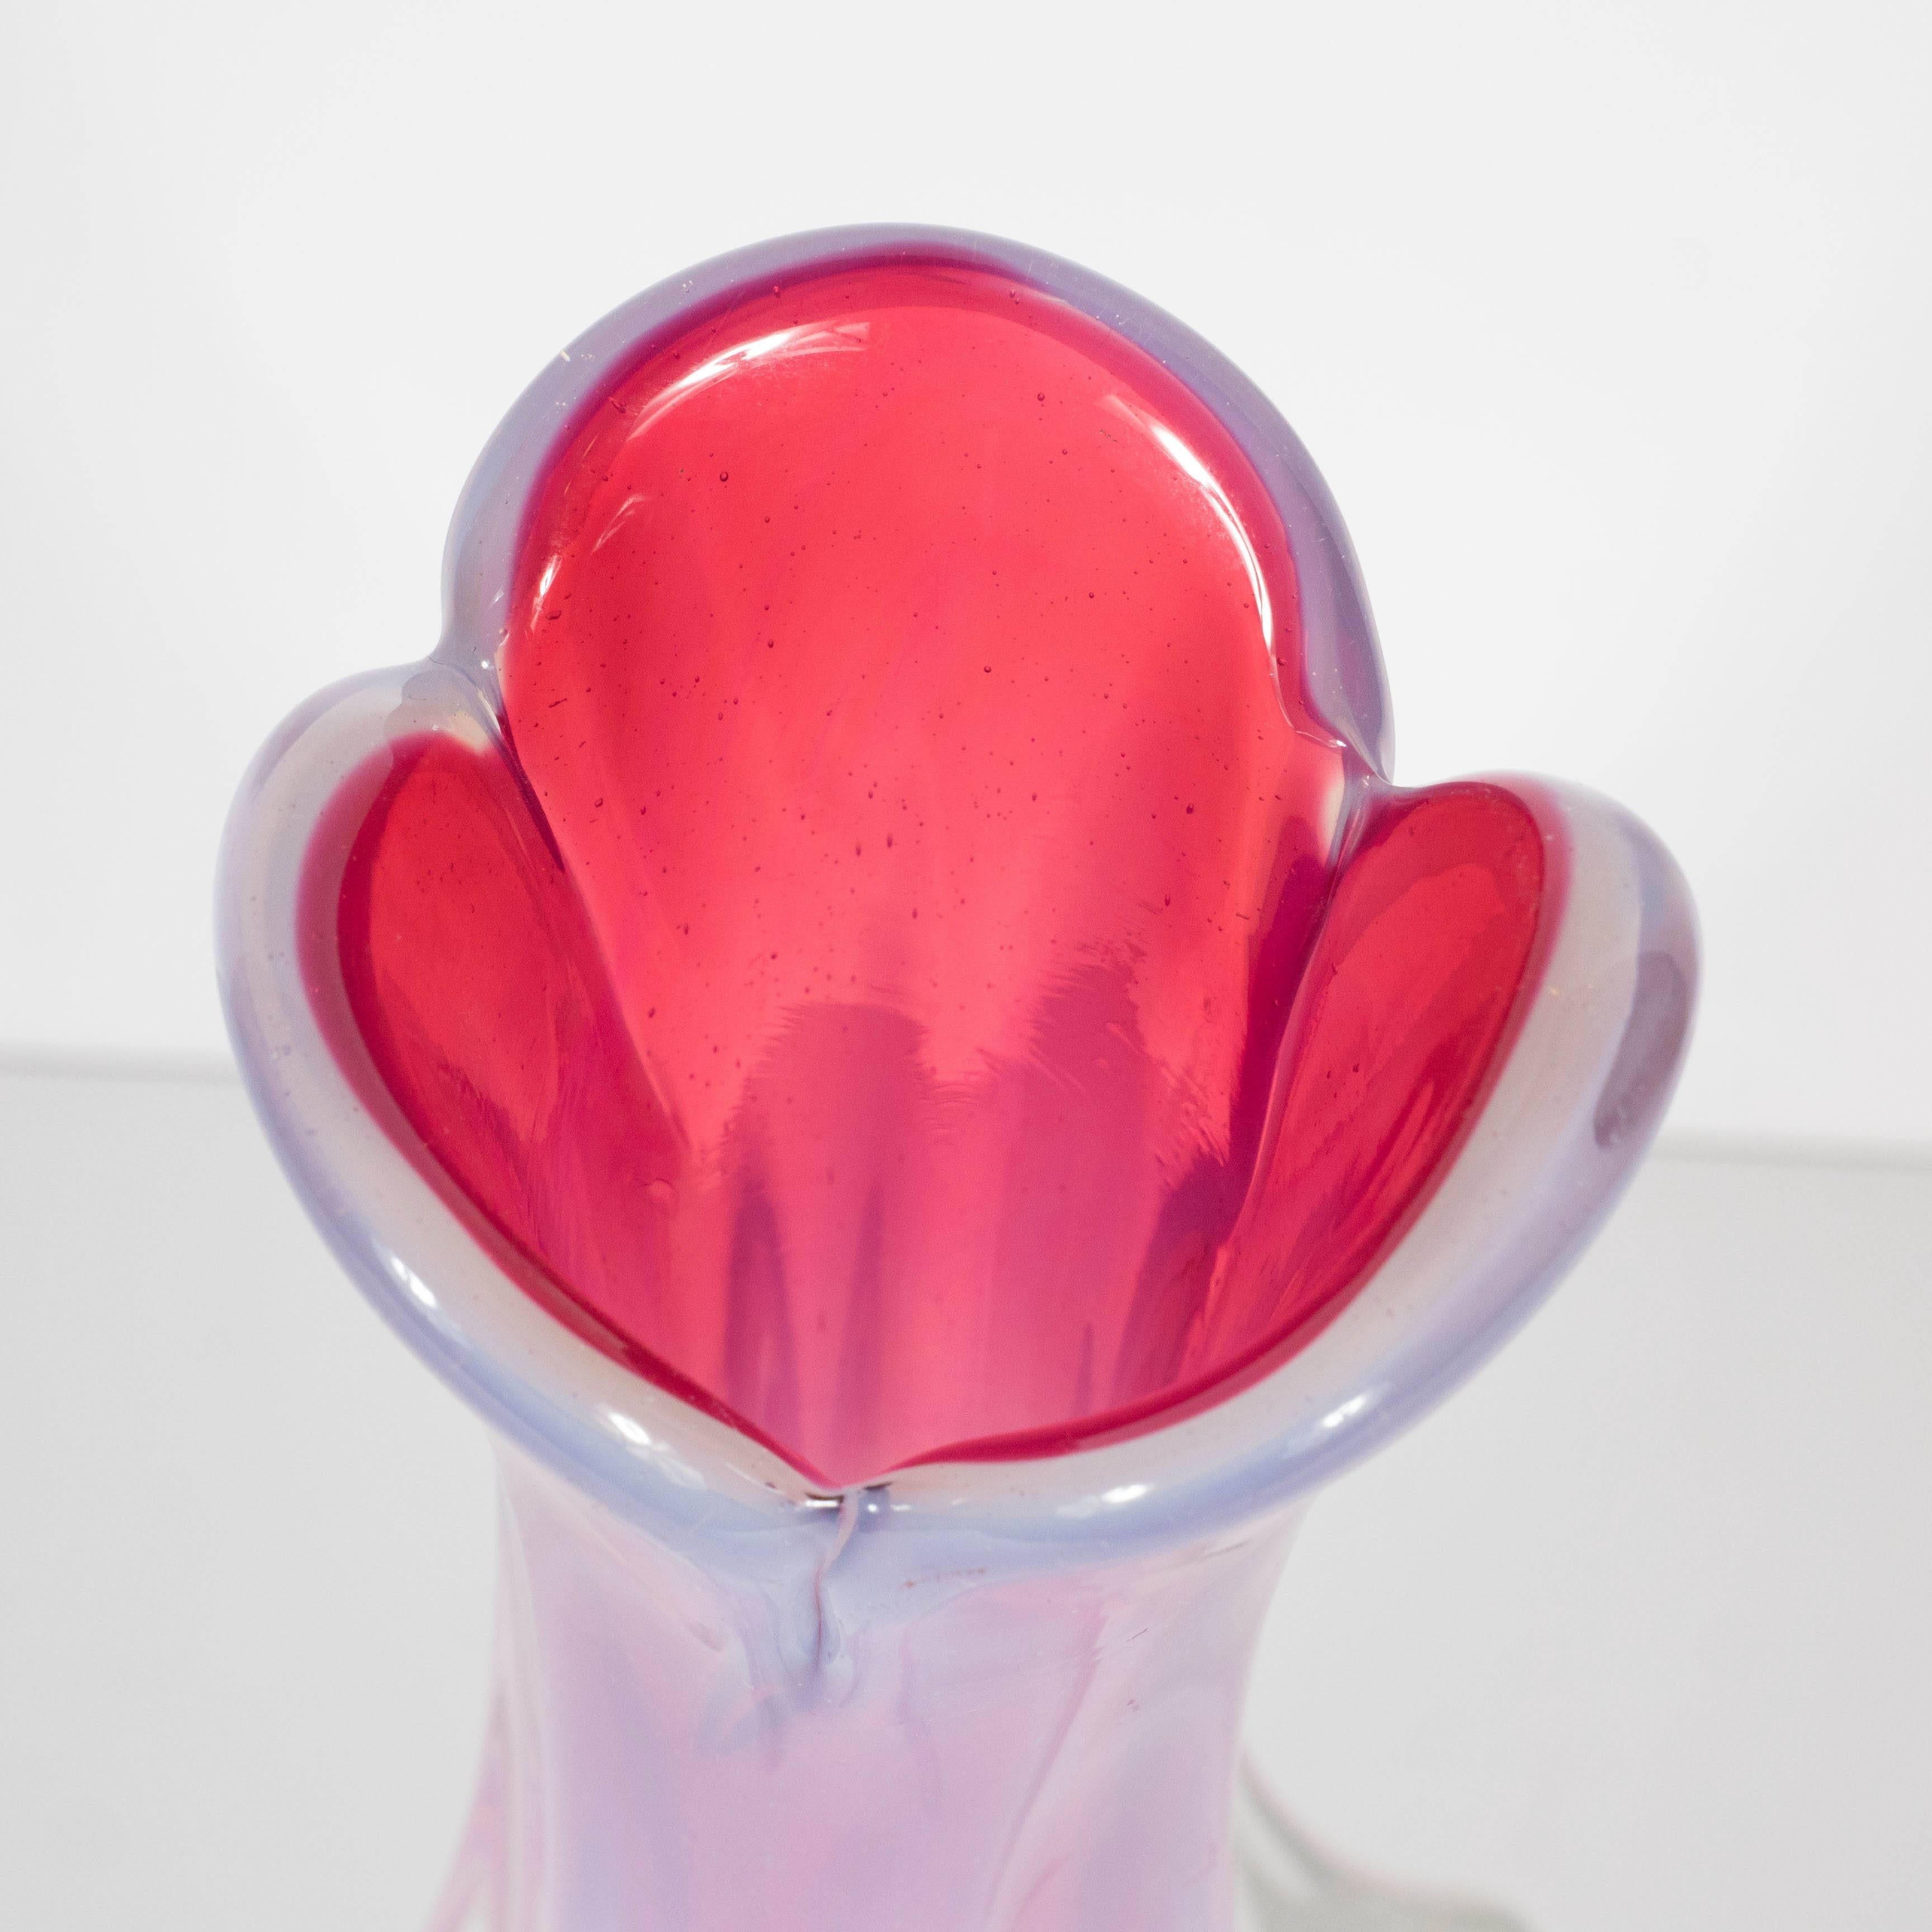 Mid-20th Century Mid-Century Handblown Murano Glass Vase in Ombre Tones of Rose and Chambord